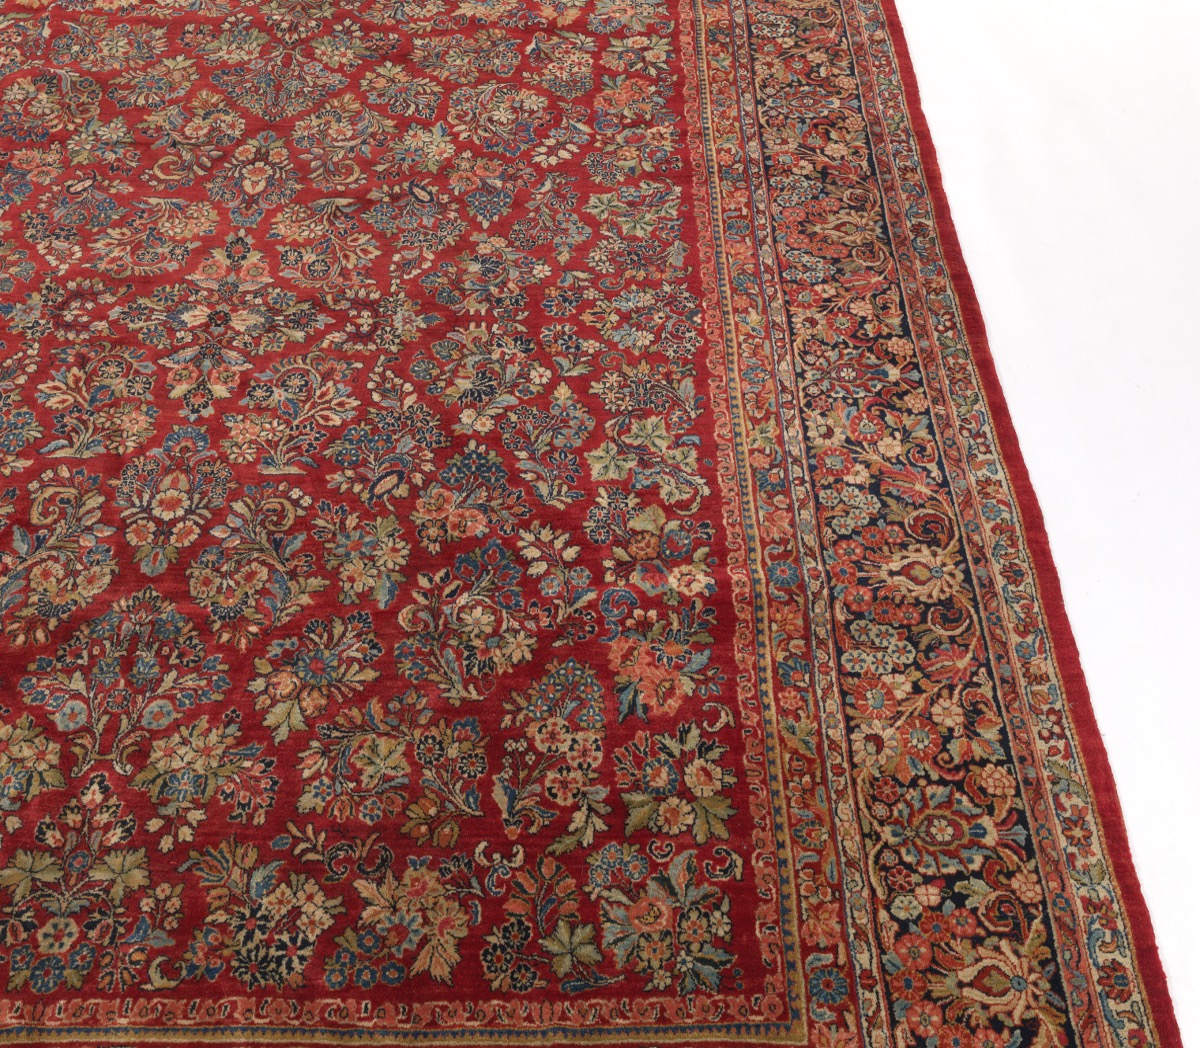 Antique Very Fine Hand Knotted Sarouk Carpet, ca. 1930's - Image 2 of 7